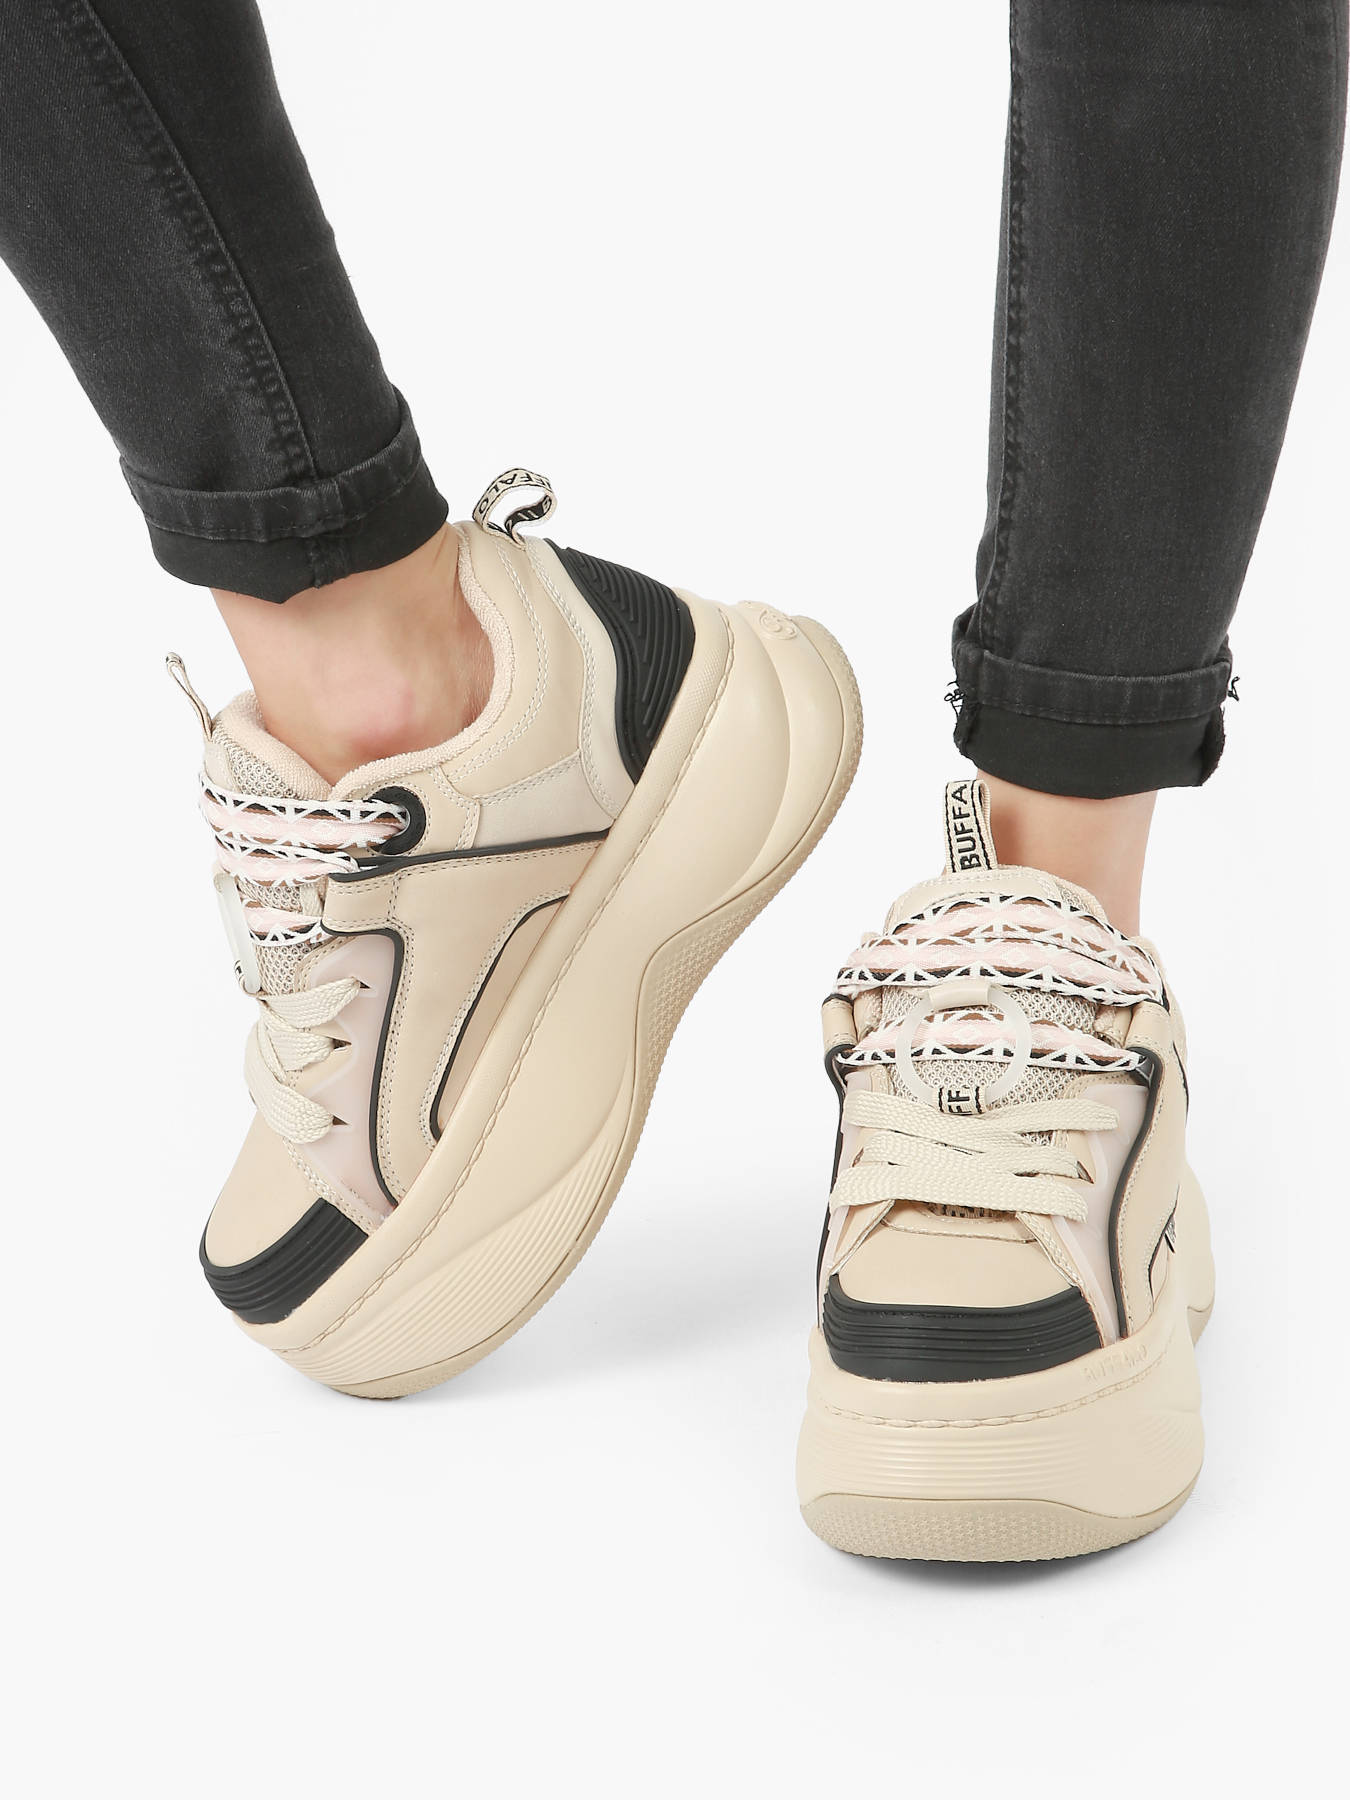 Buffalo London classic leather lowtop chunky sneakers in white | ASOS